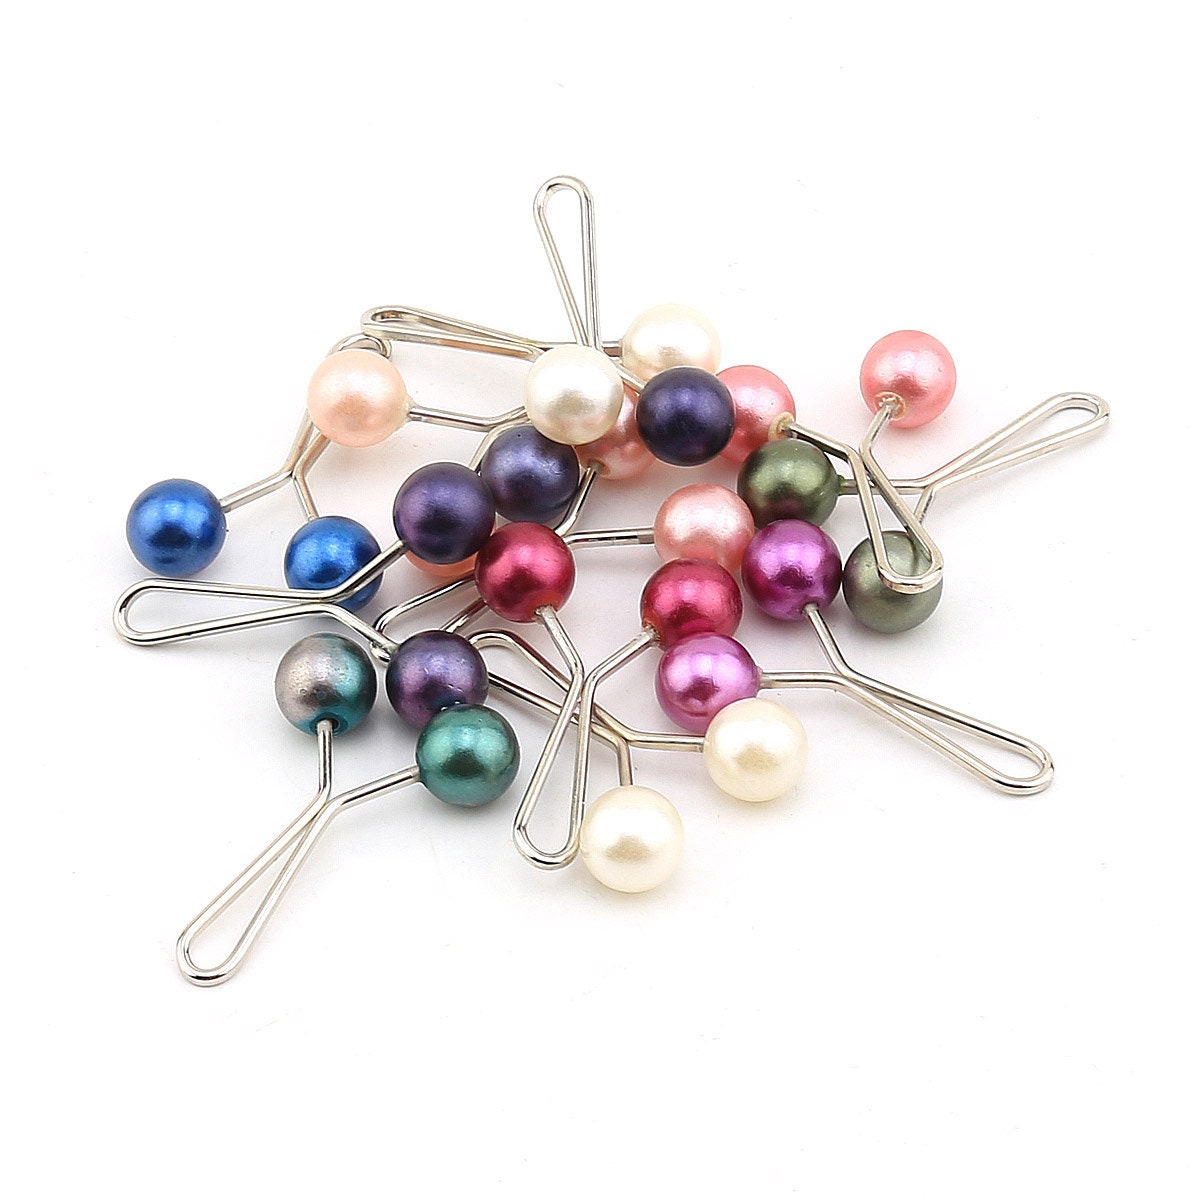 Safety Scarf Pins Hijab Pins Flower Bow Hijab Scarf Pins Headscarf Secure  Safety Clips Durable Easy to Use Set of 8 or Set of 48 Pins 